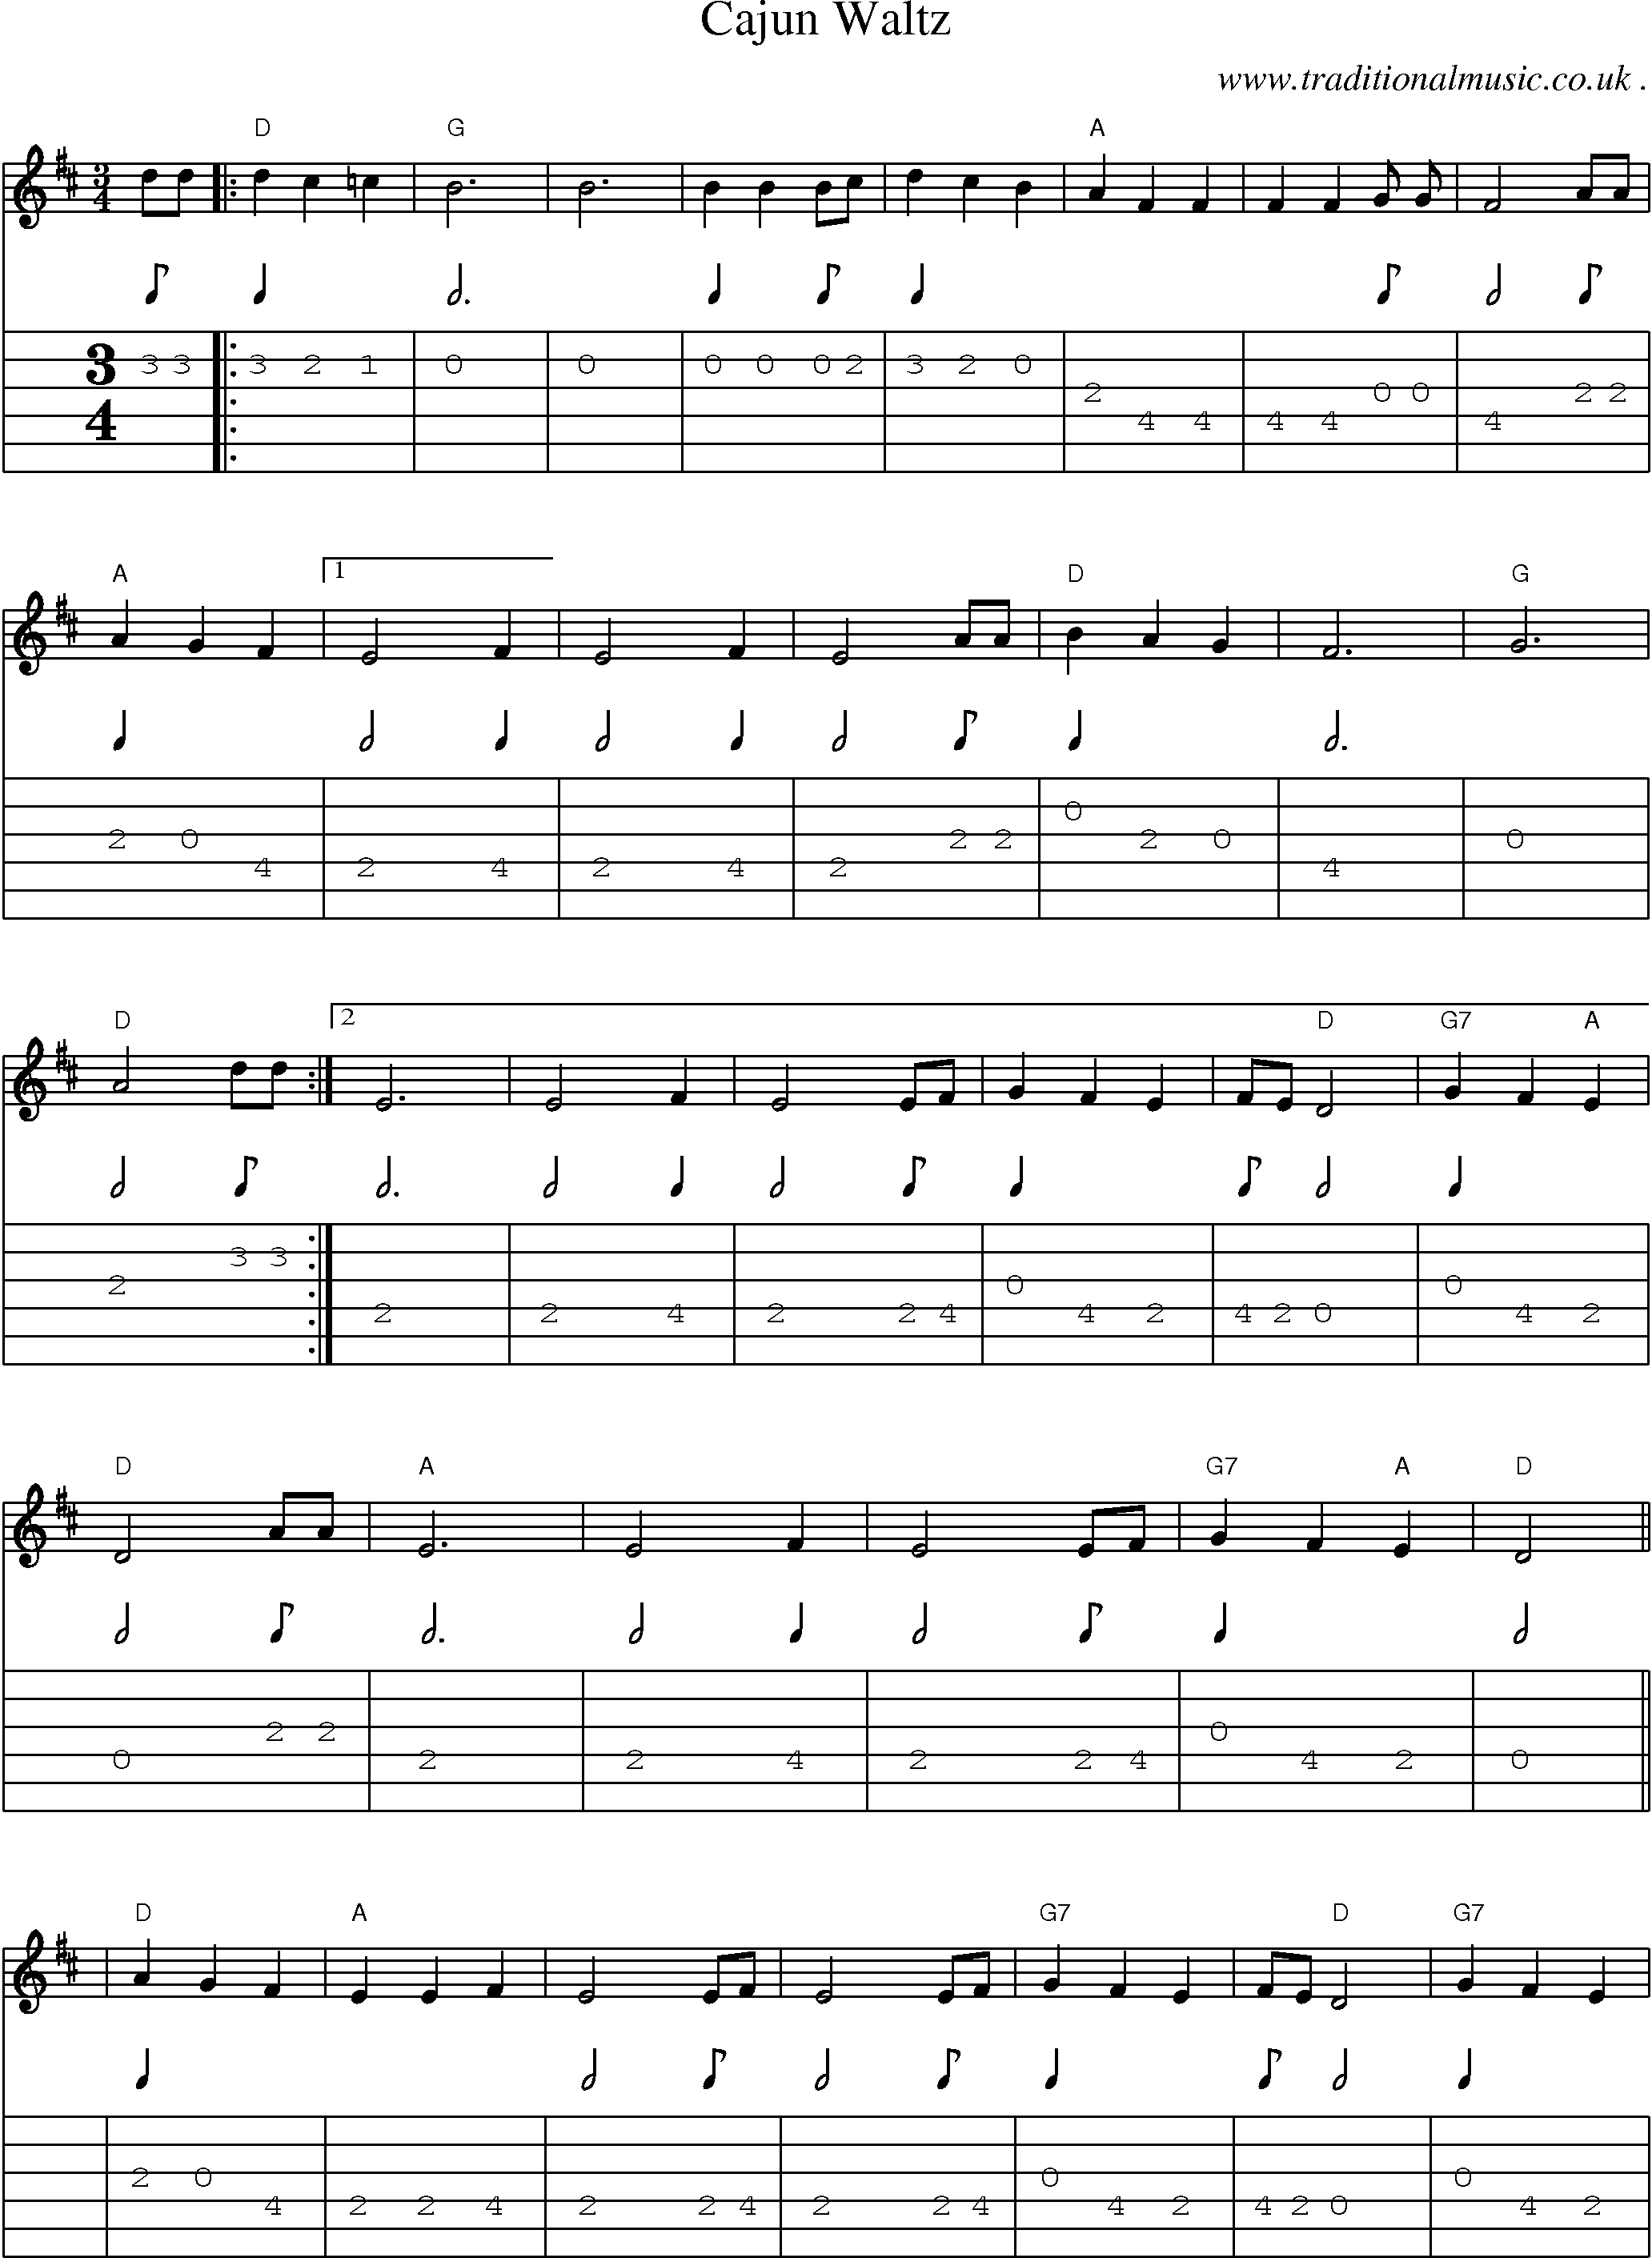 Music Score and Guitar Tabs for Cajun Waltz